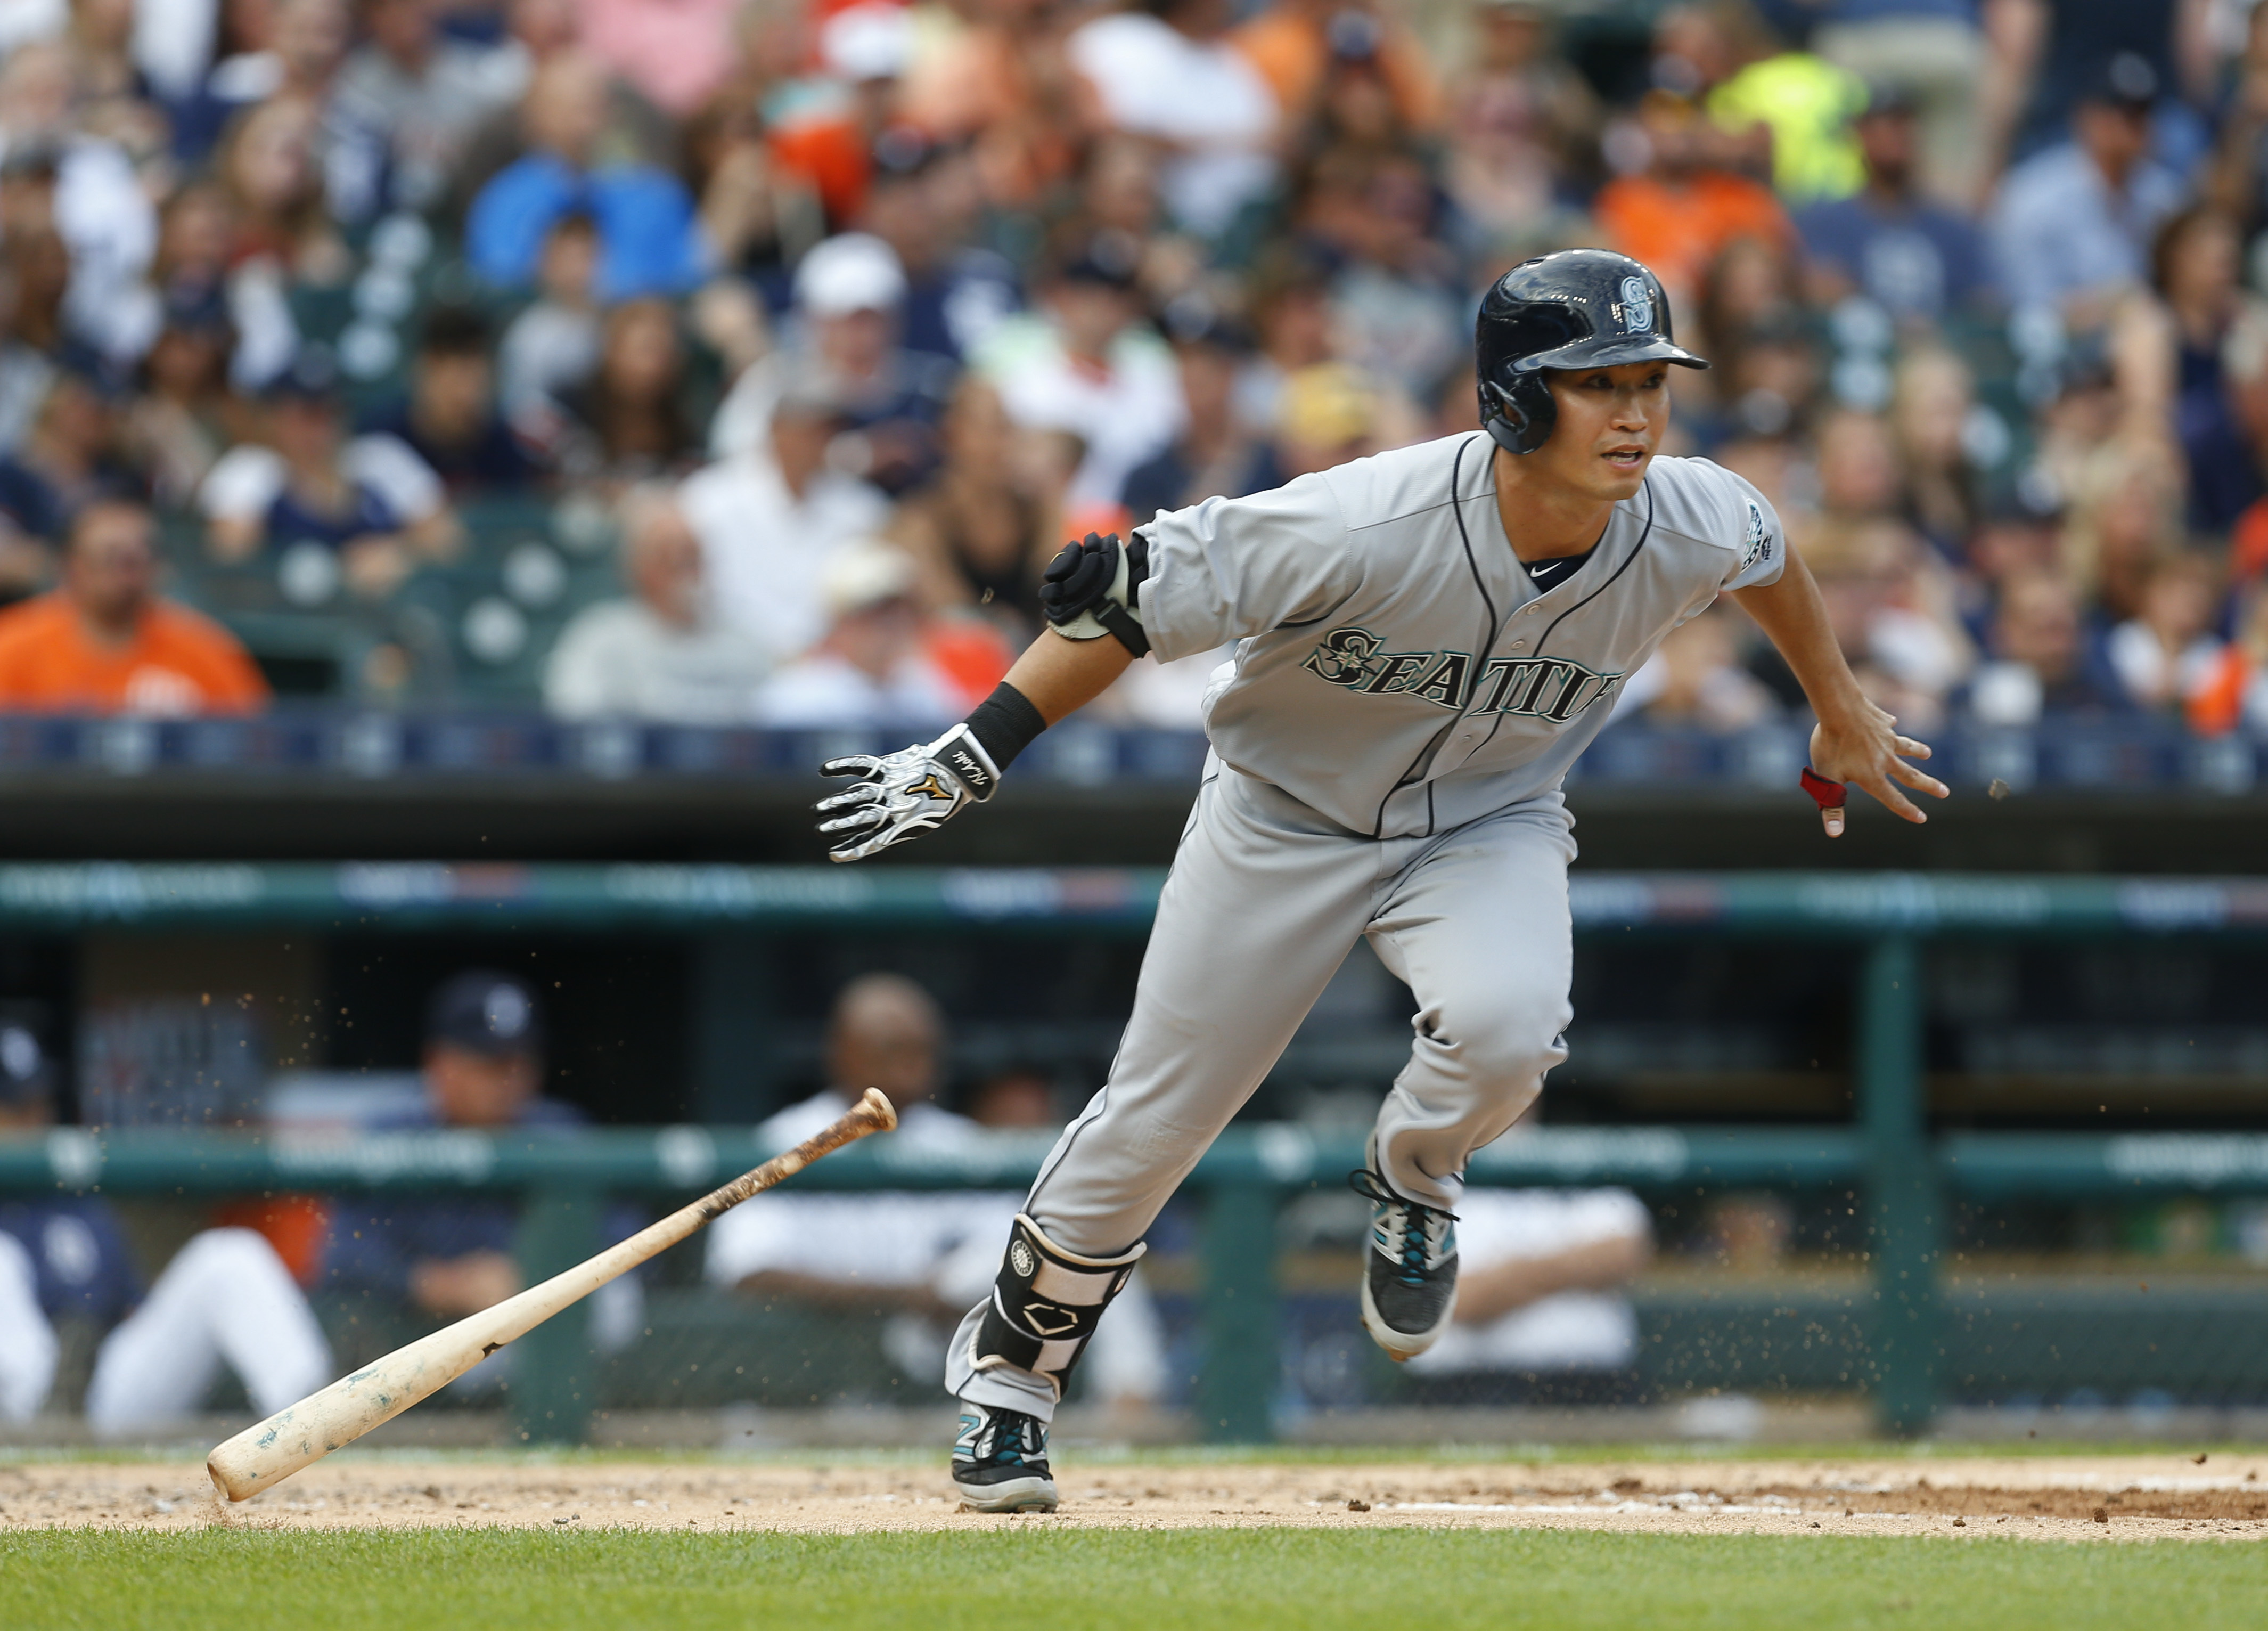 Tigers lose series finale, win road series over Mariners